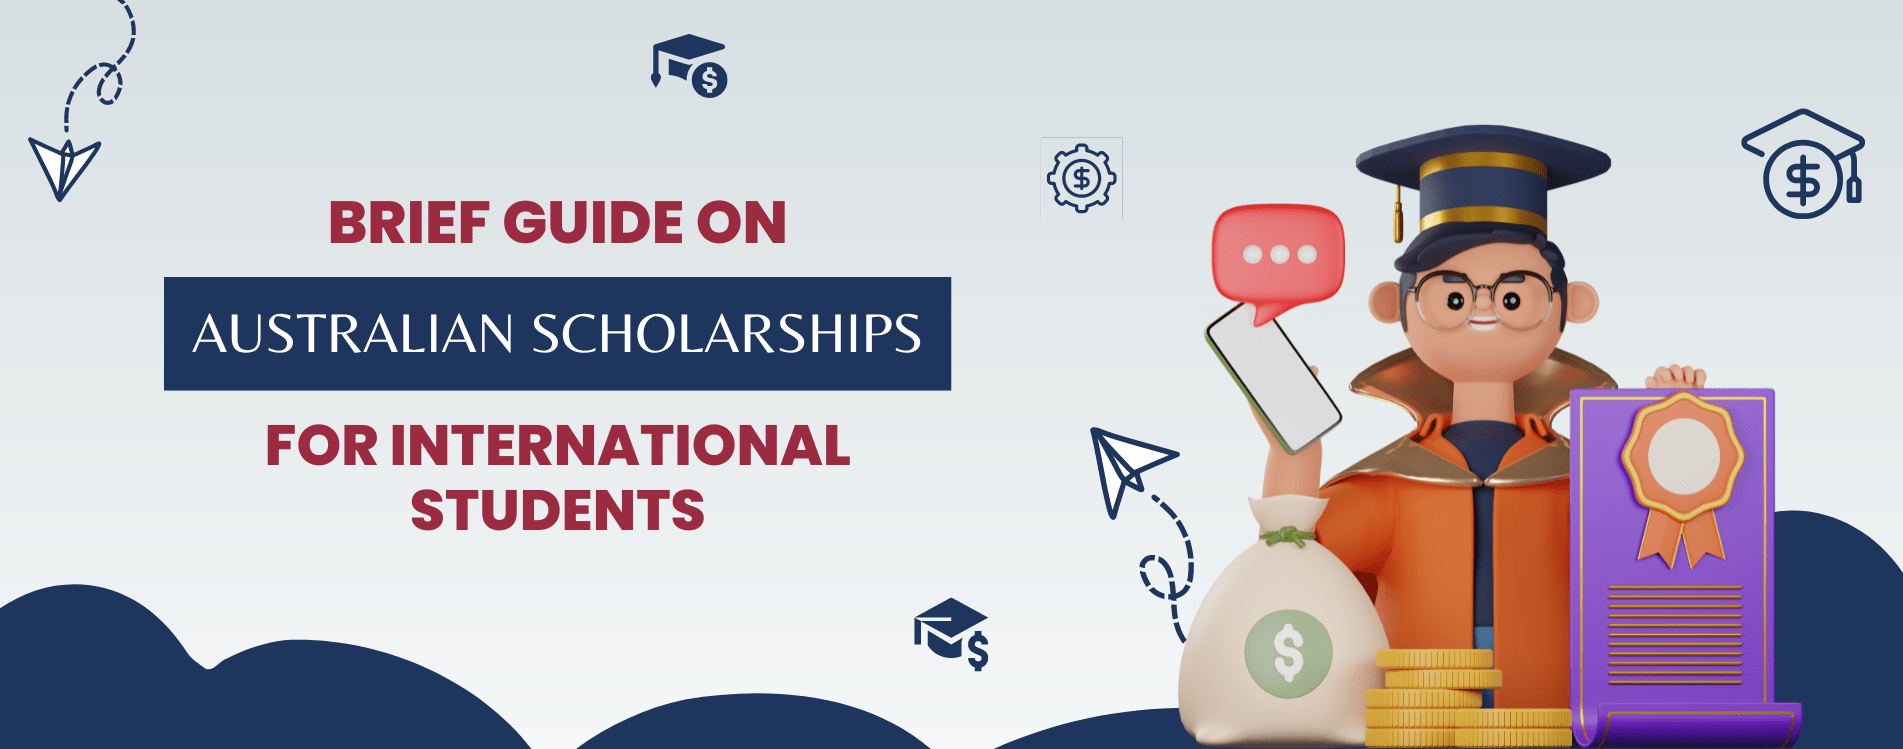 Brief Guide on Australian Scholarships for International Students